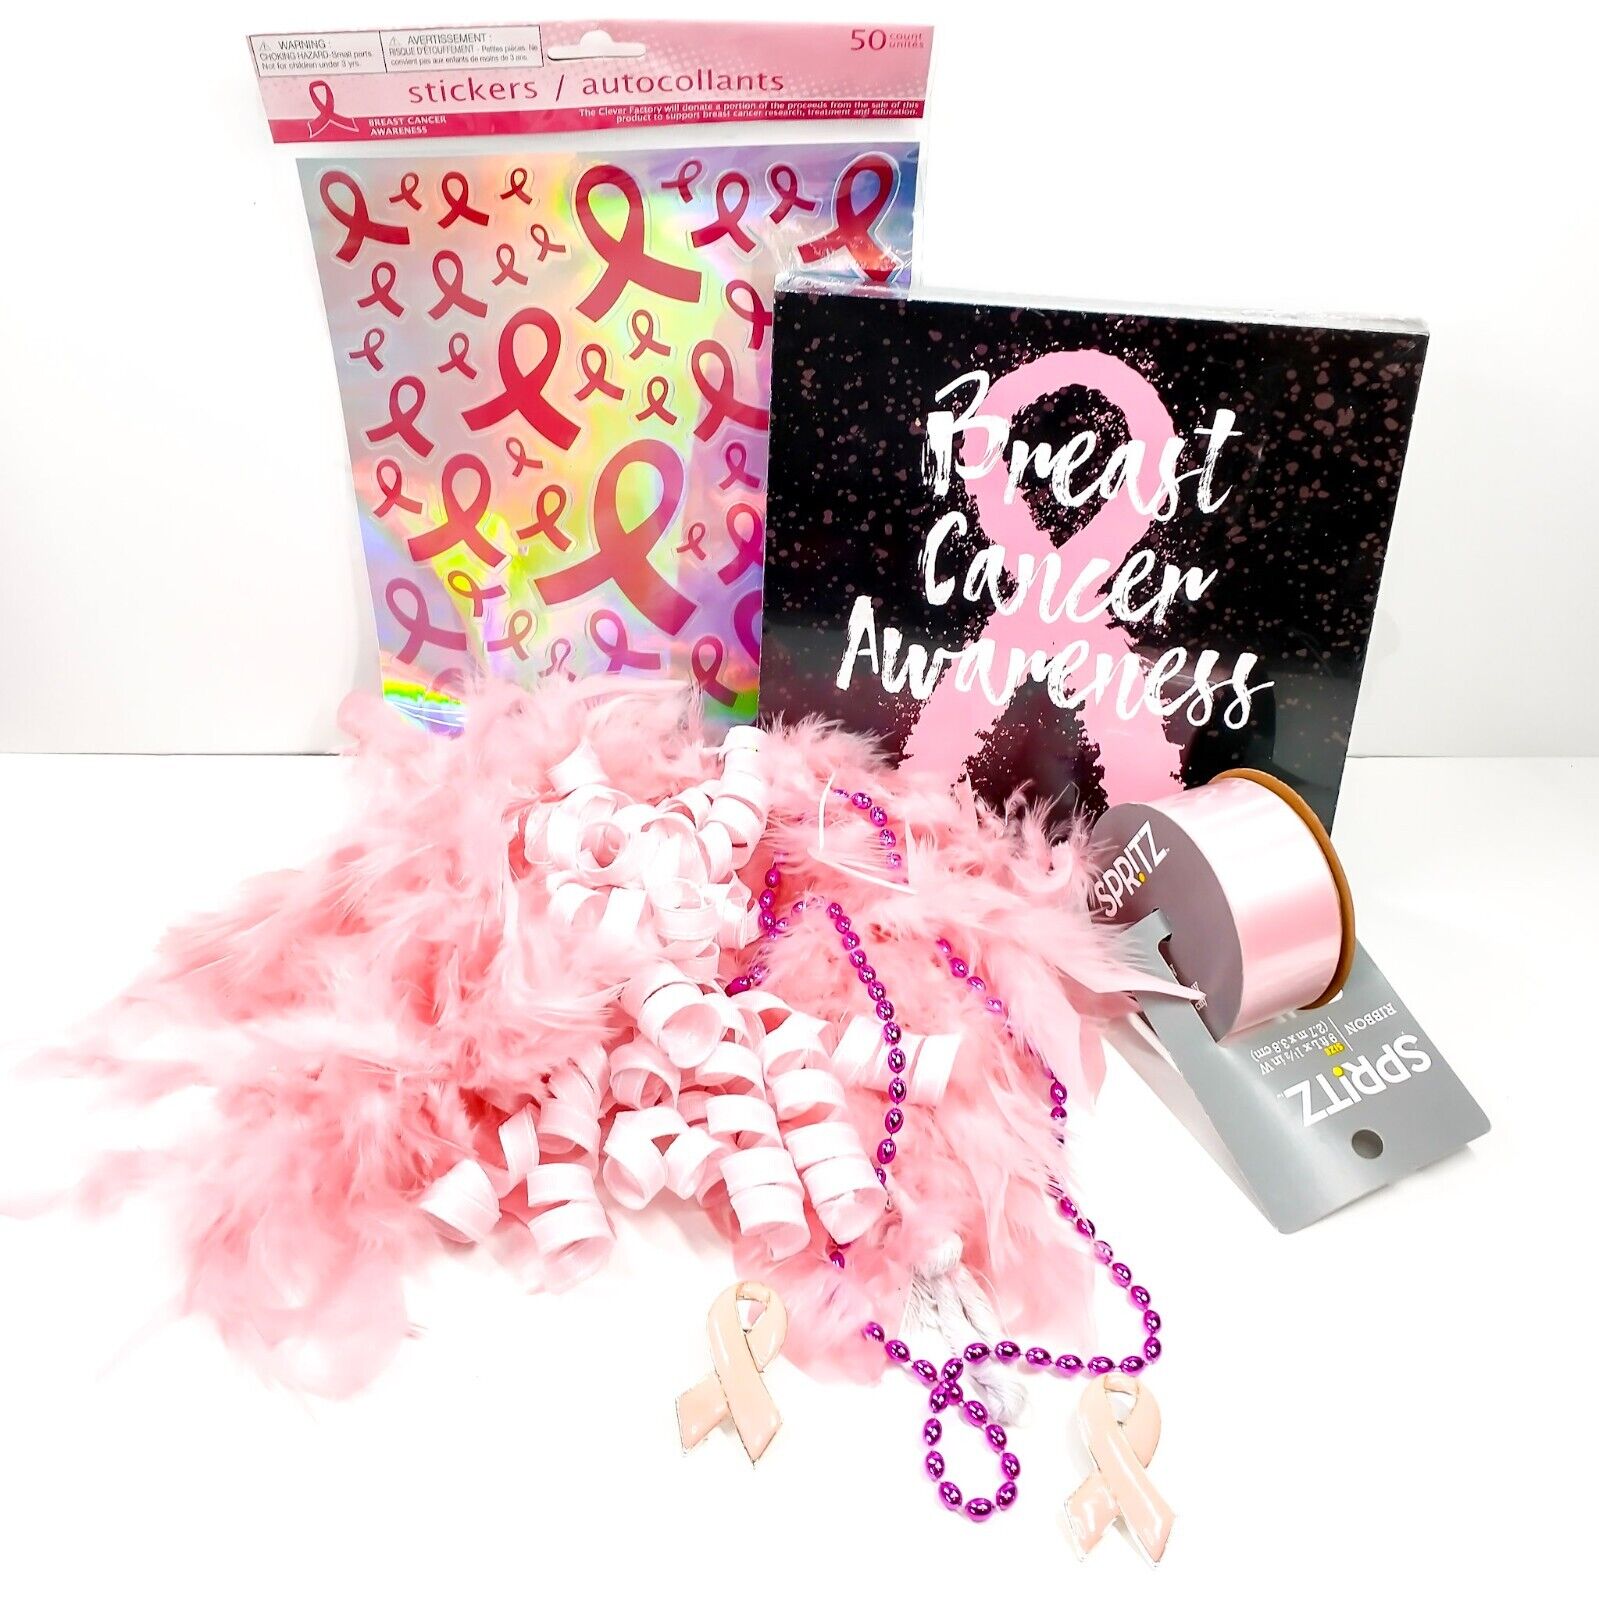 Breast Cancer Awareness Lot/bundle~sign, Stickers, Pins, Ribbon, Feathers, Beads